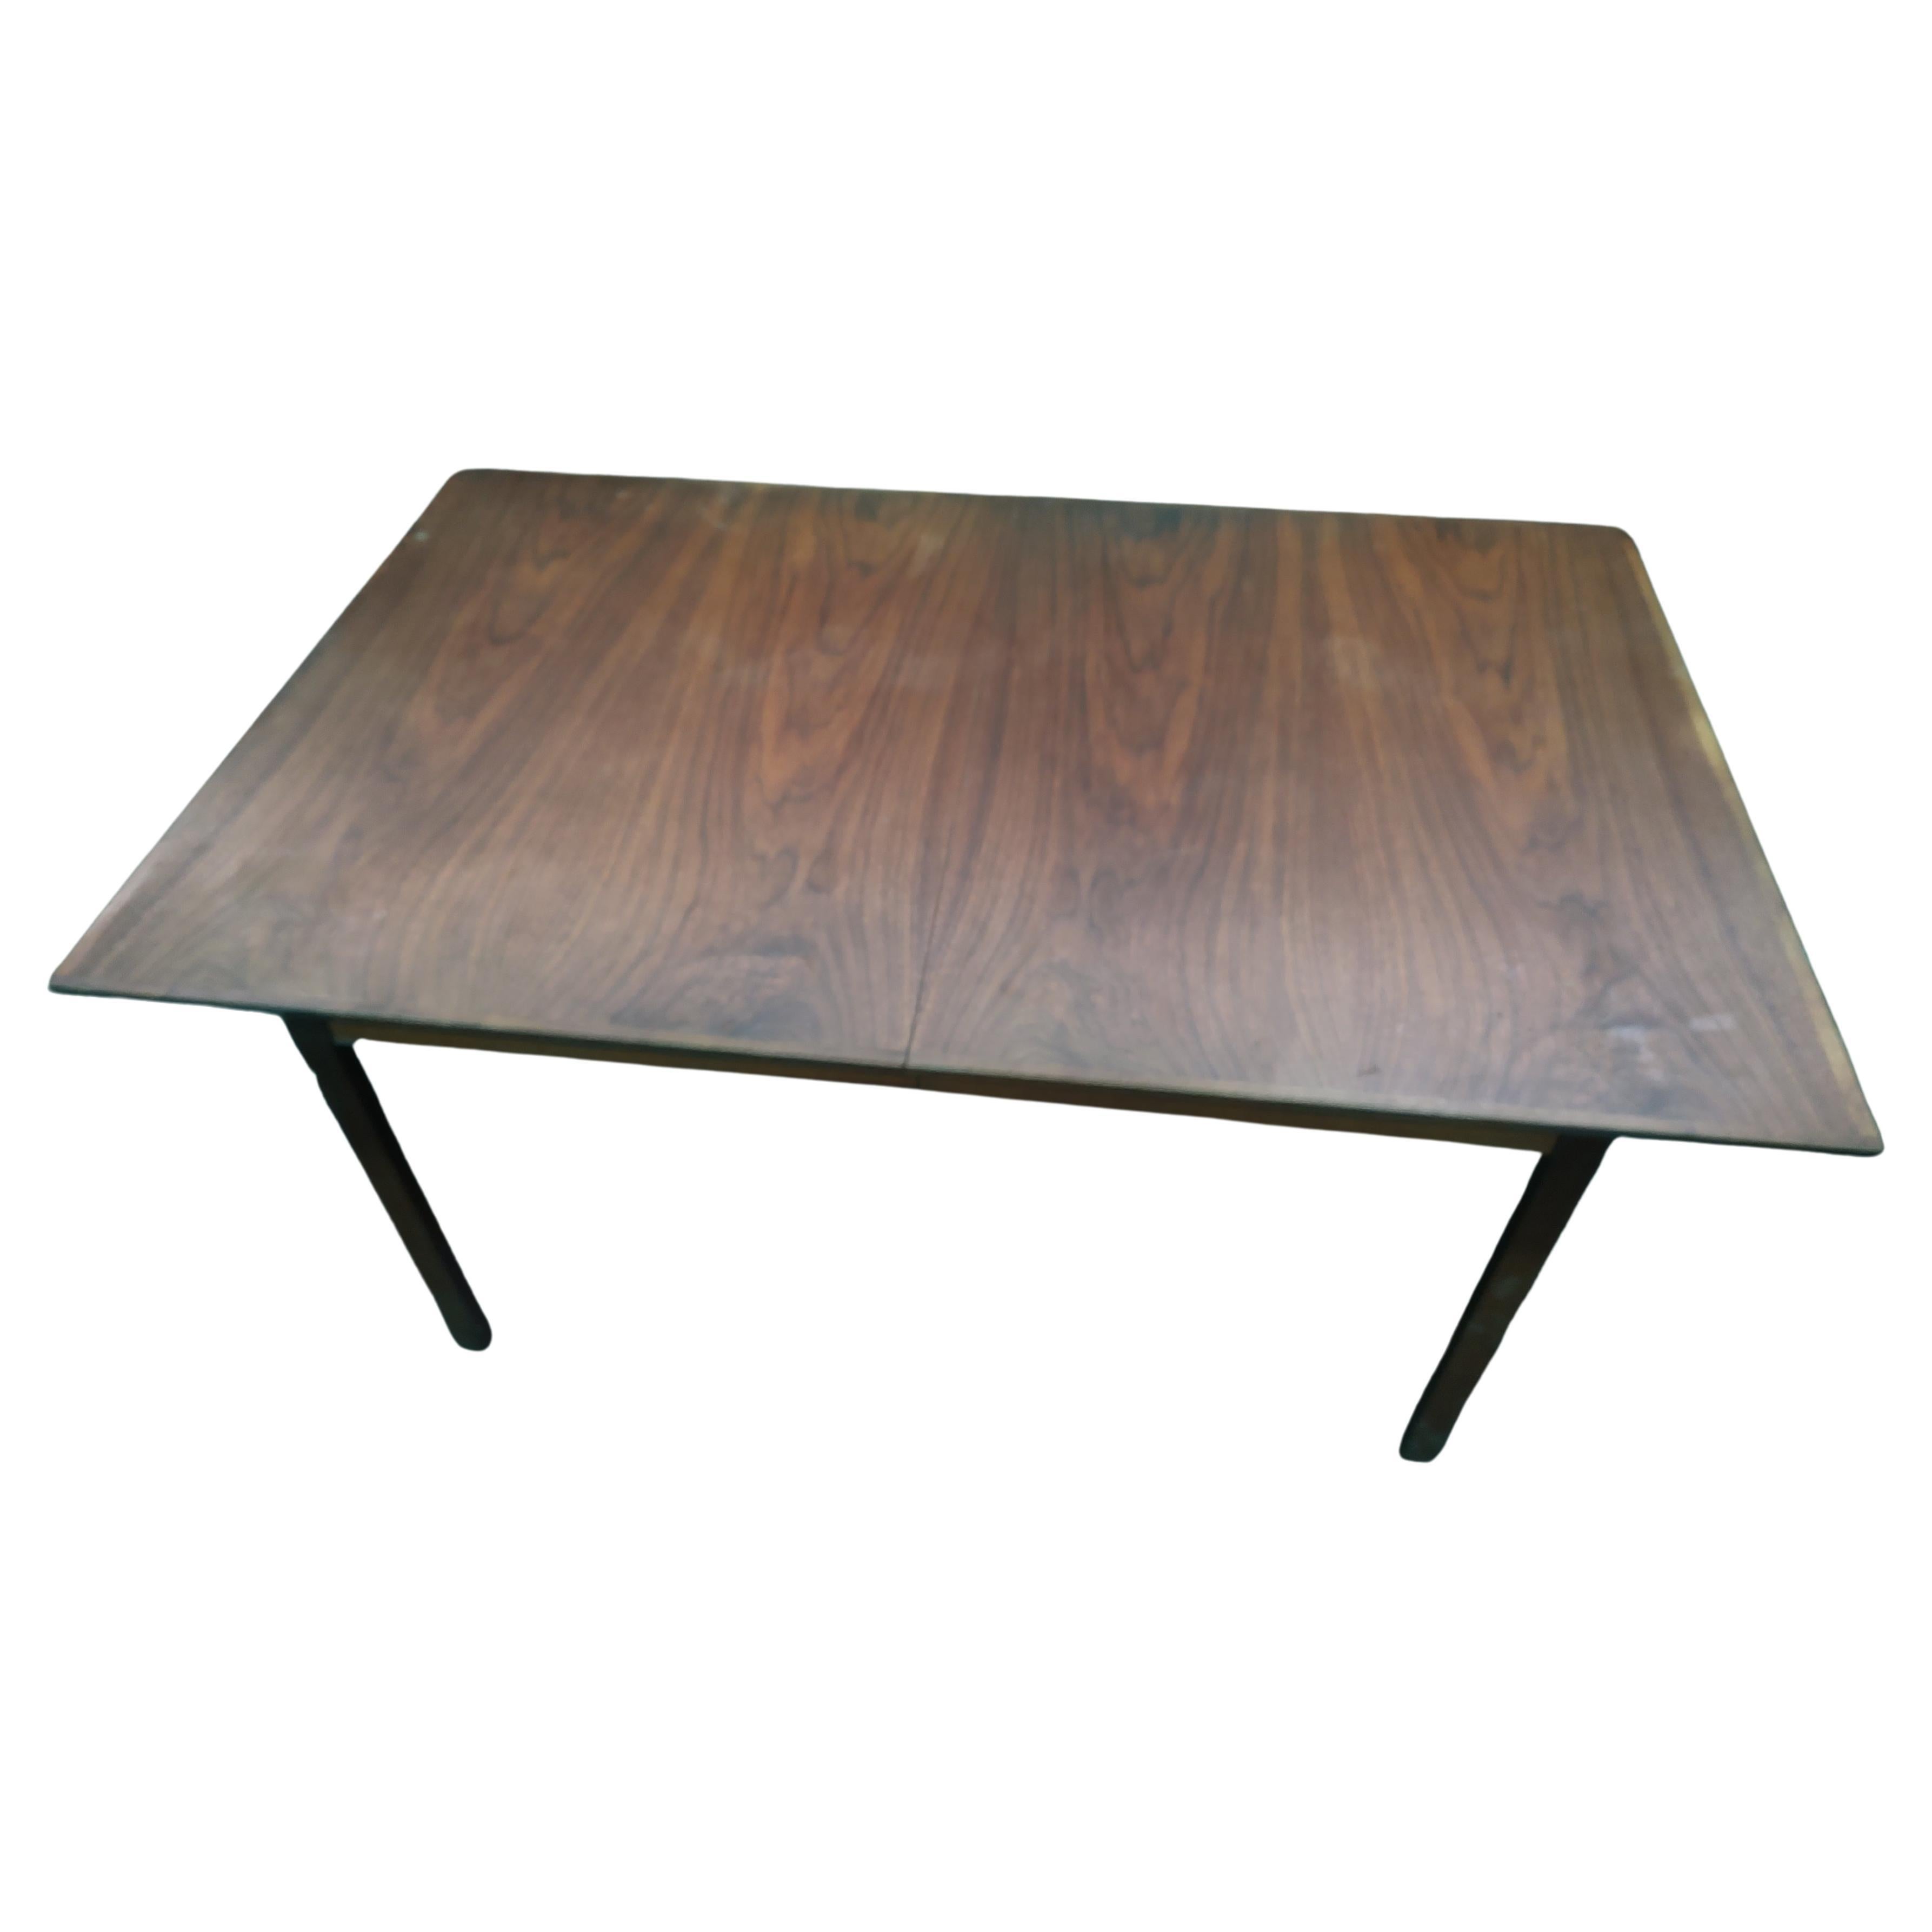 Mid Century Modern Walnut Extension Dining Room Table  im Zustand „Gut“ im Angebot in Port Jervis, NY